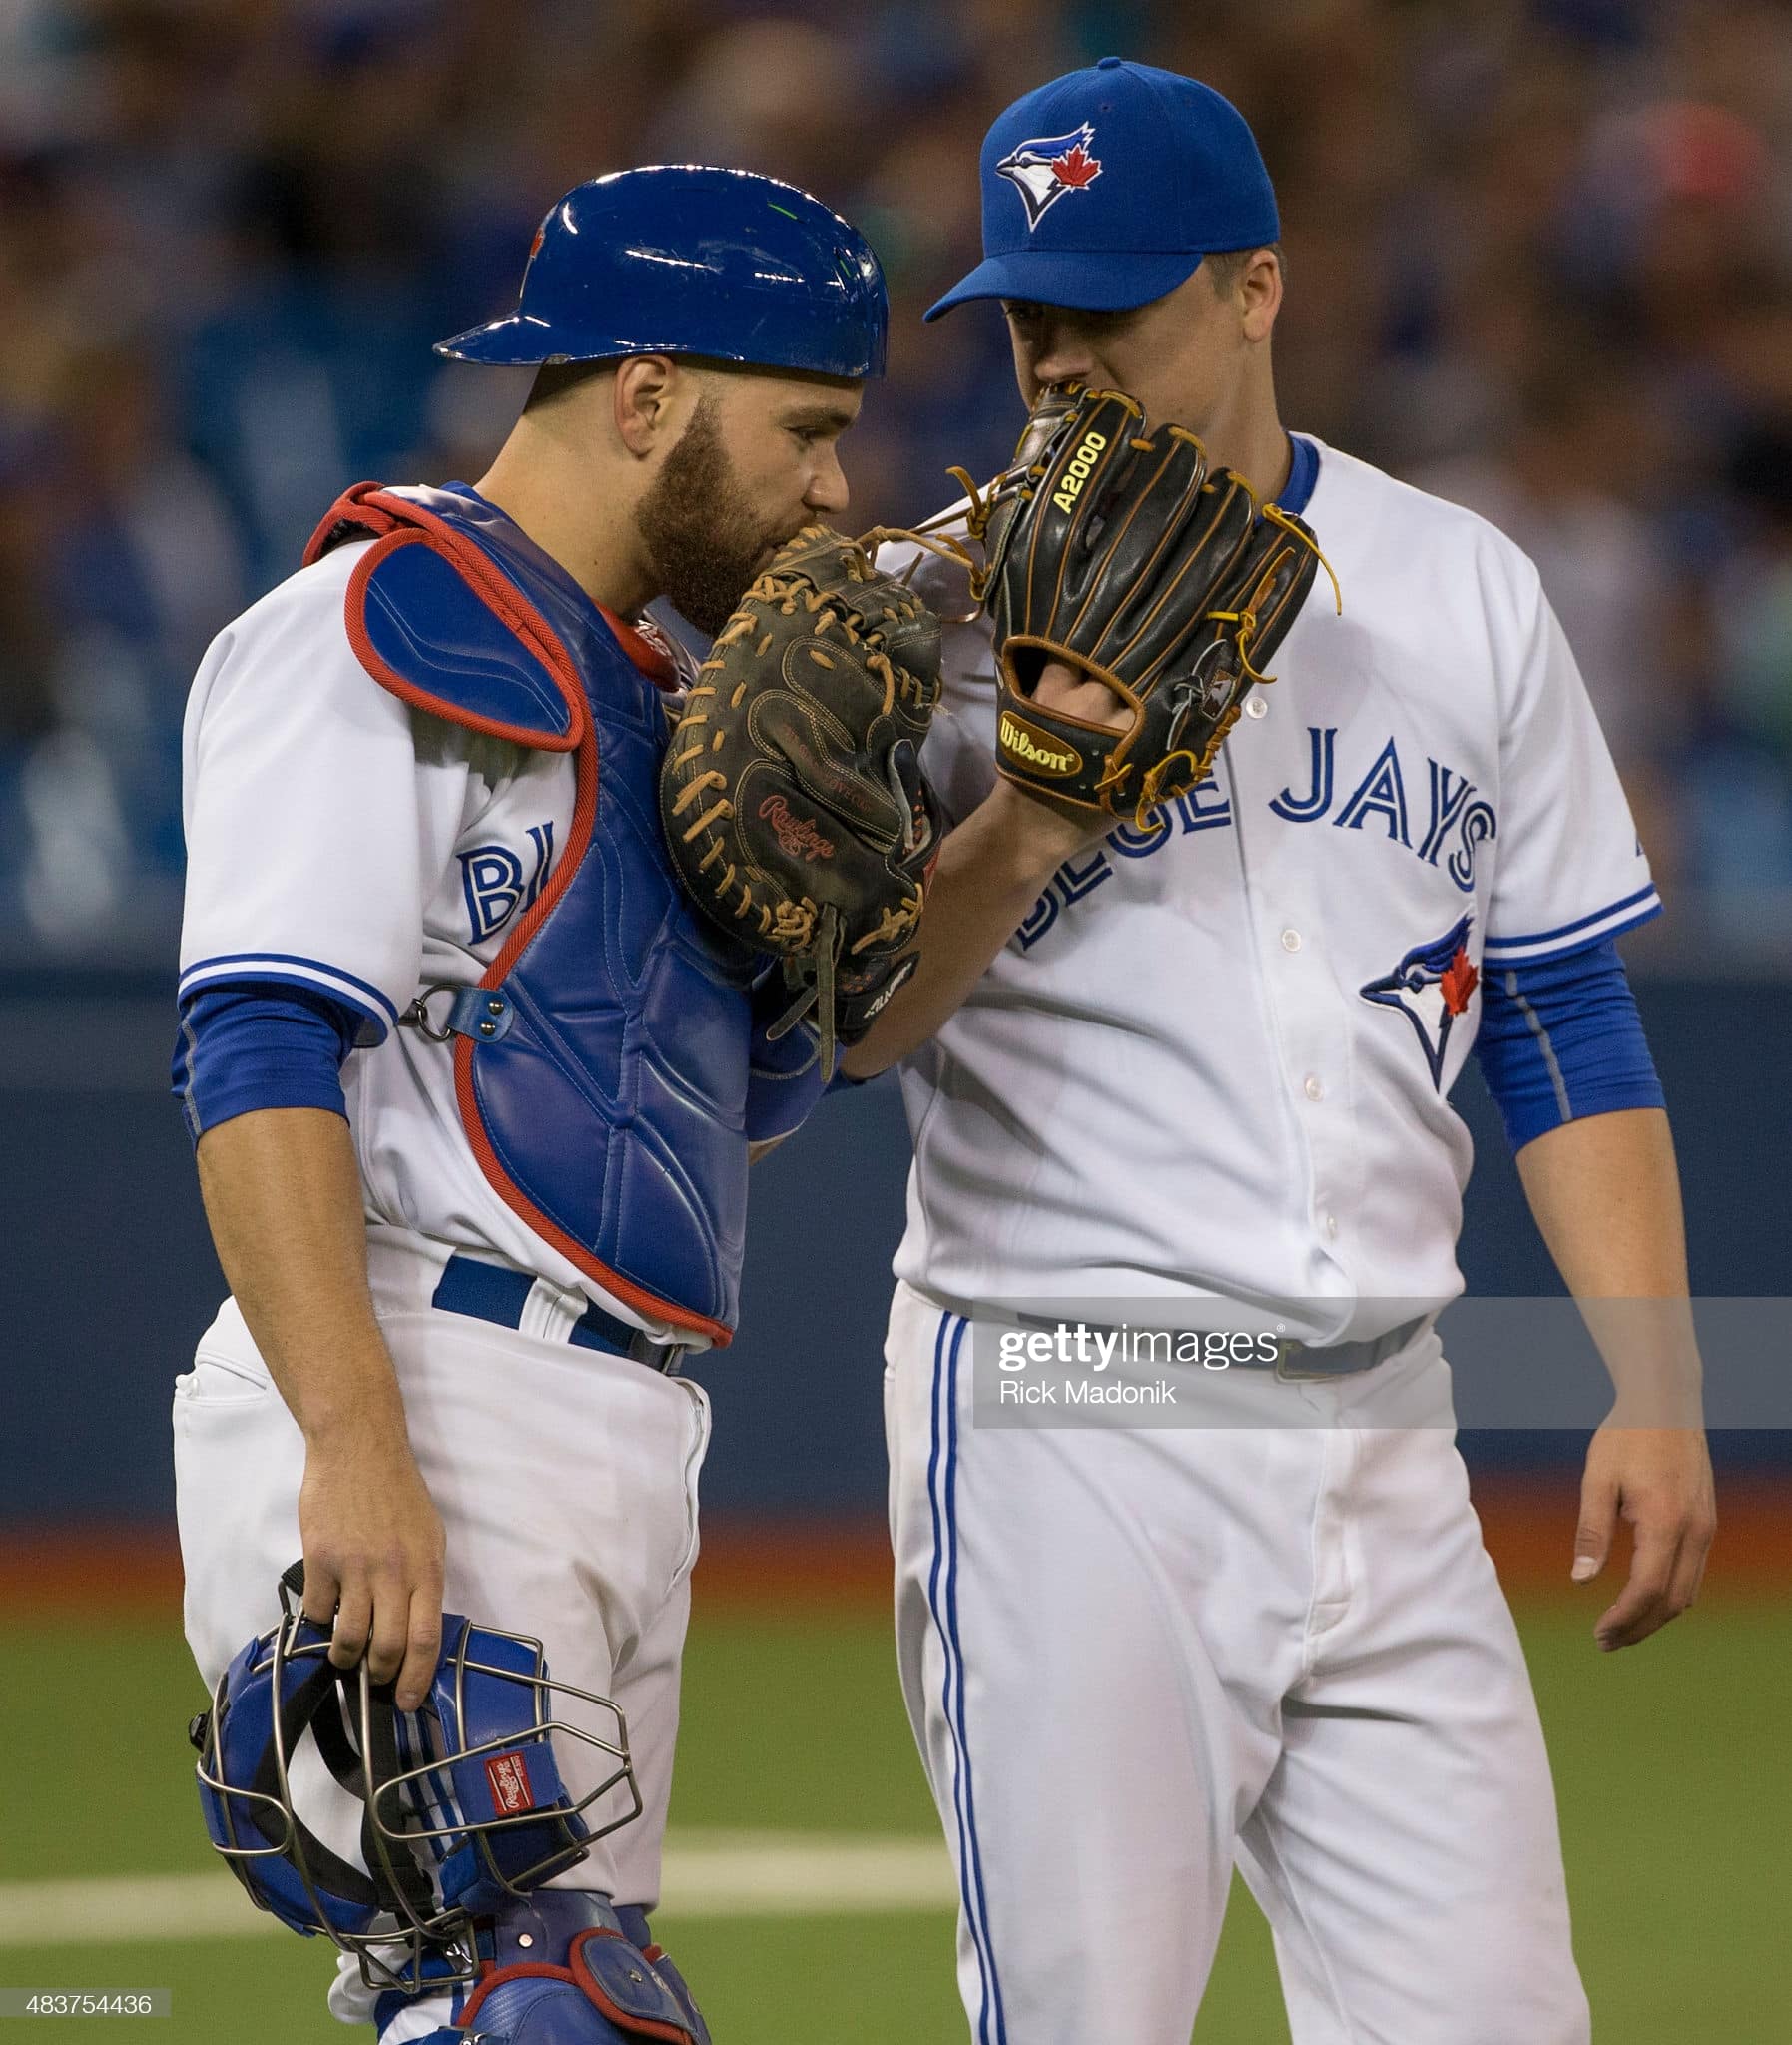 Russell Martin during an August 2015 game at the Skydome